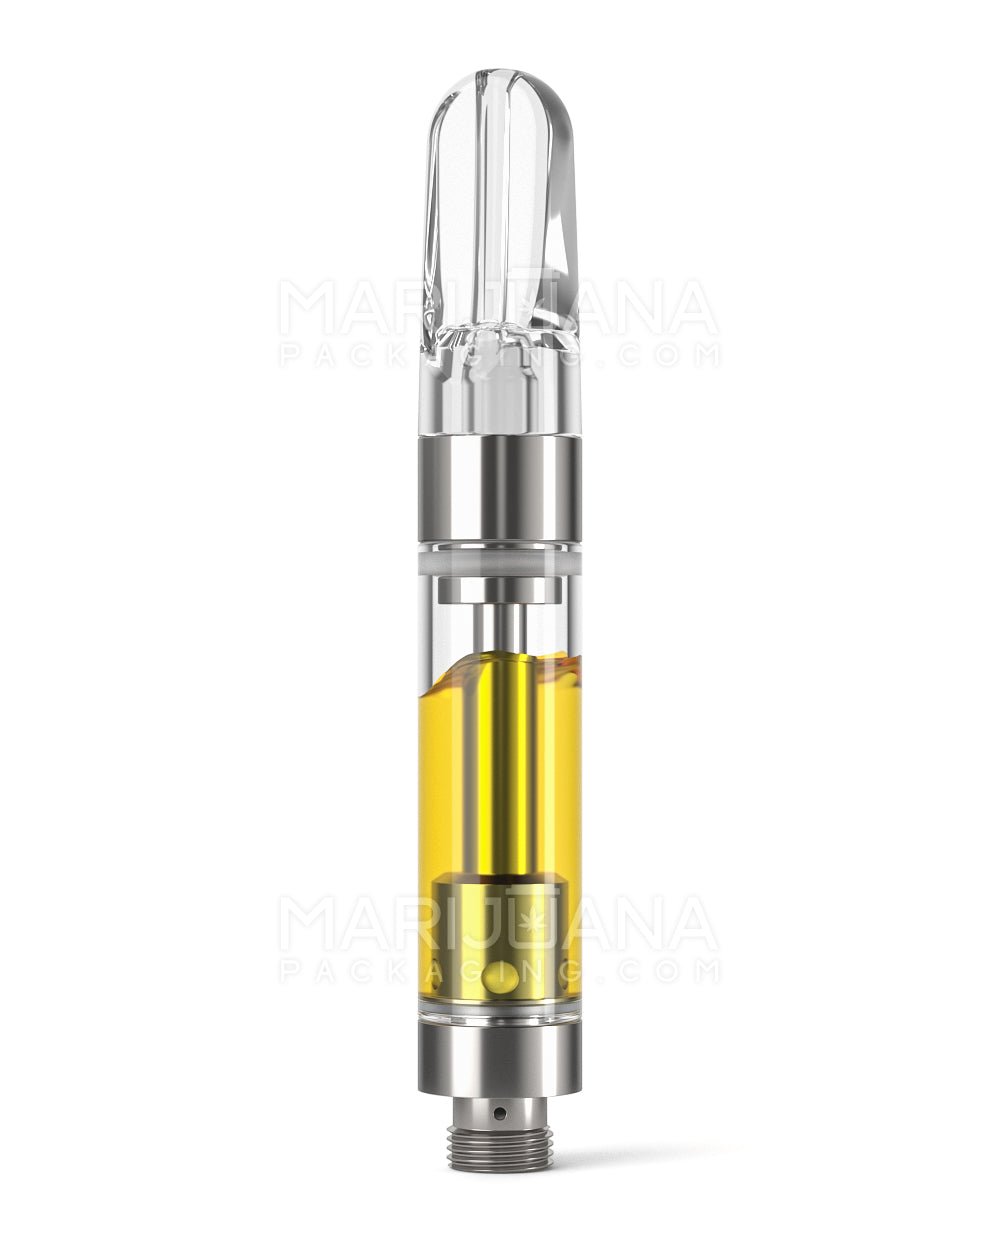 Ceramic Core Glass Vape Cartridge with Flat Clear Plastic Mouthpiece | 1mL - Press On - 1600 Count - 2